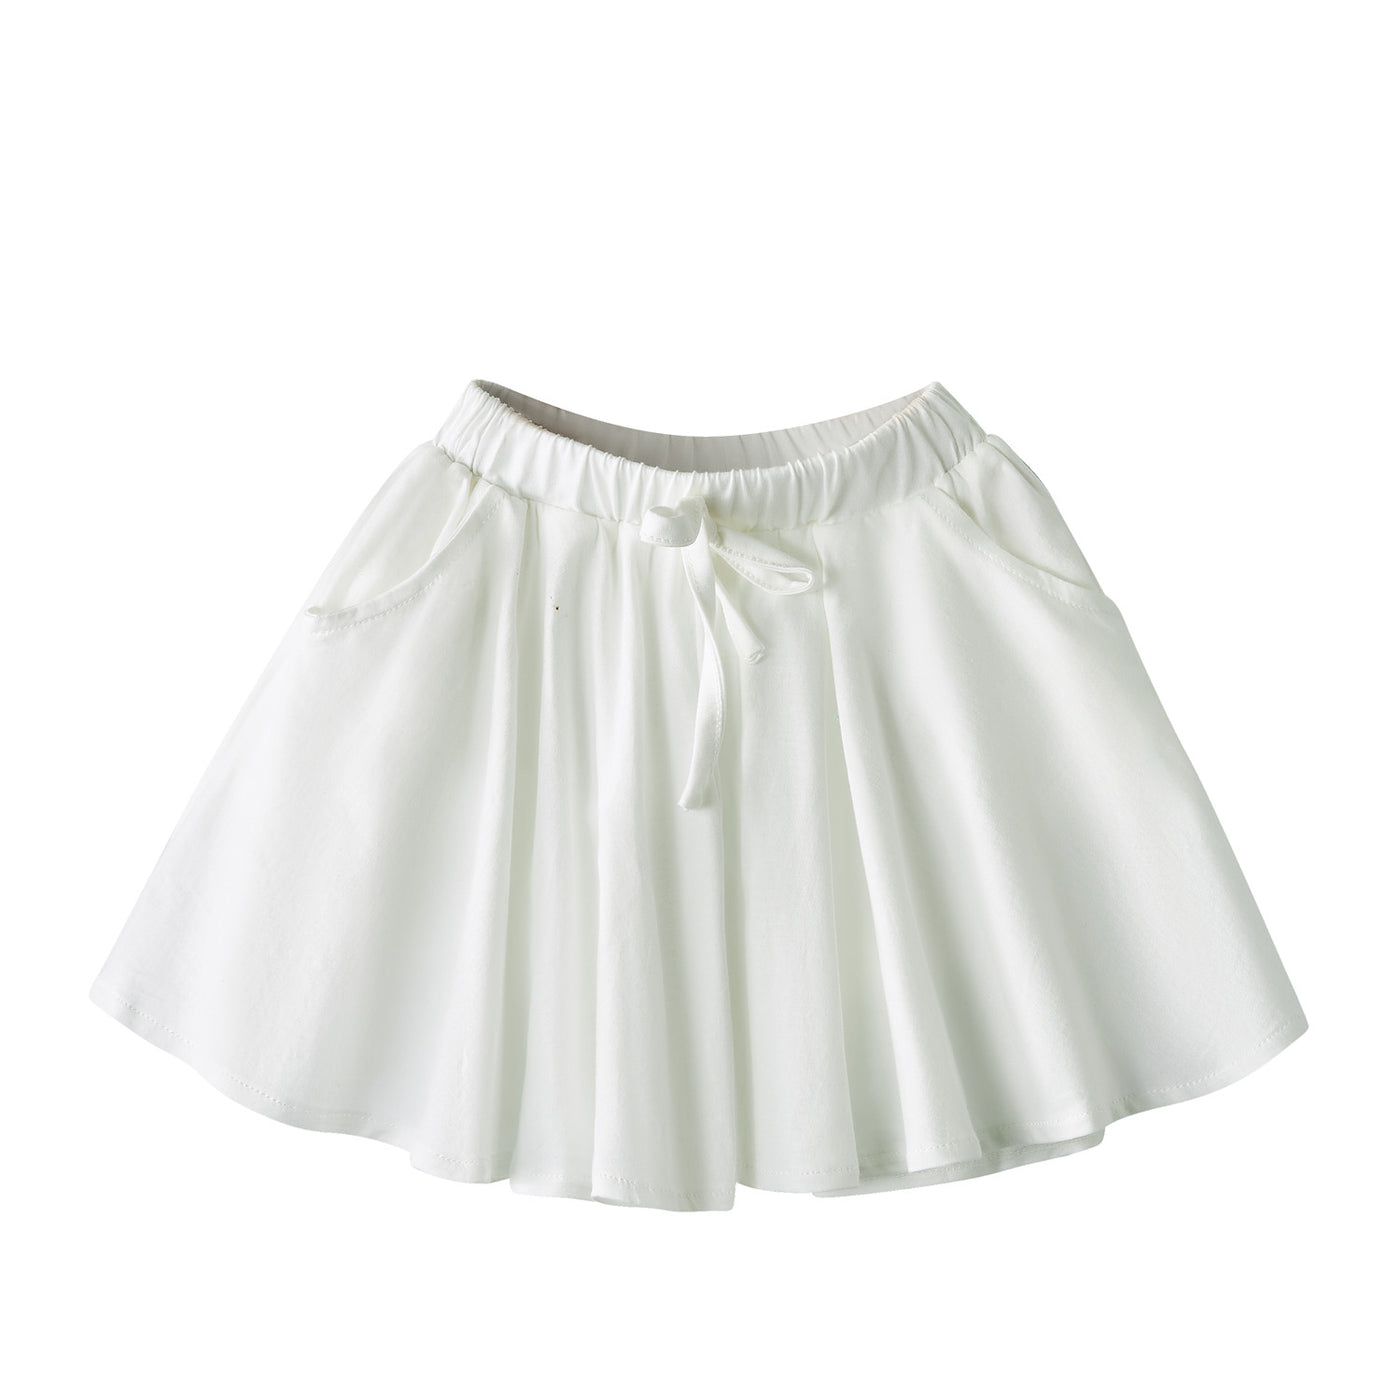 Baby Kids Plain White Pleated Detail Skort Culottes Shorts Skirt 100% Cotton Bottom National Day Outfit - Little Kooma